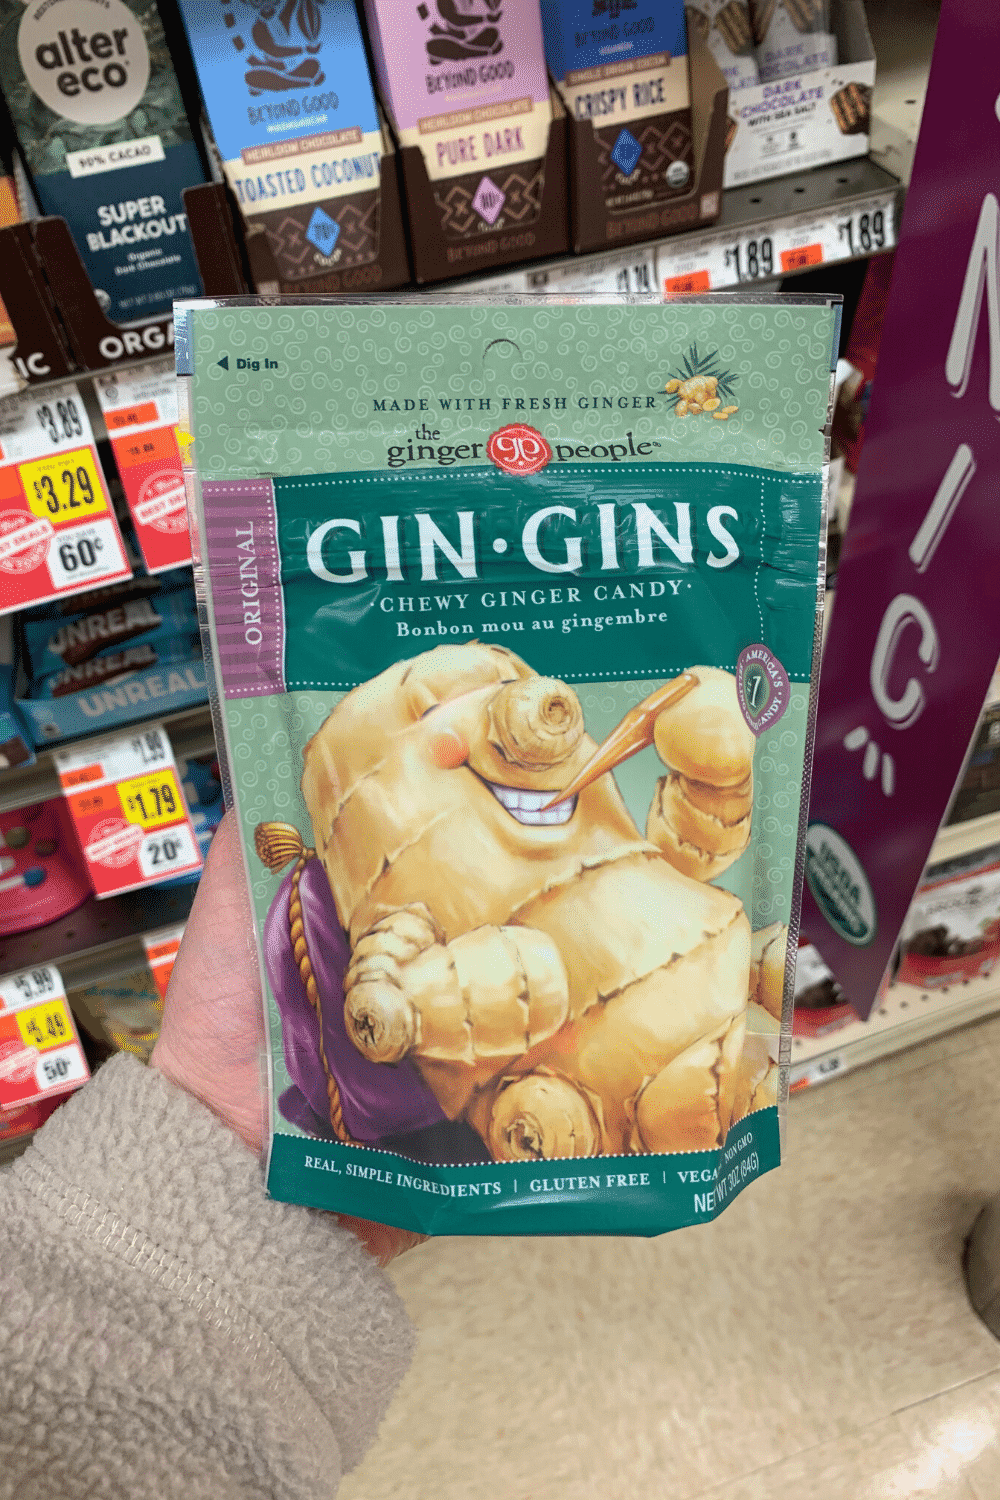 A hand holding a bag of Gin-Gins original chewy ginger candy